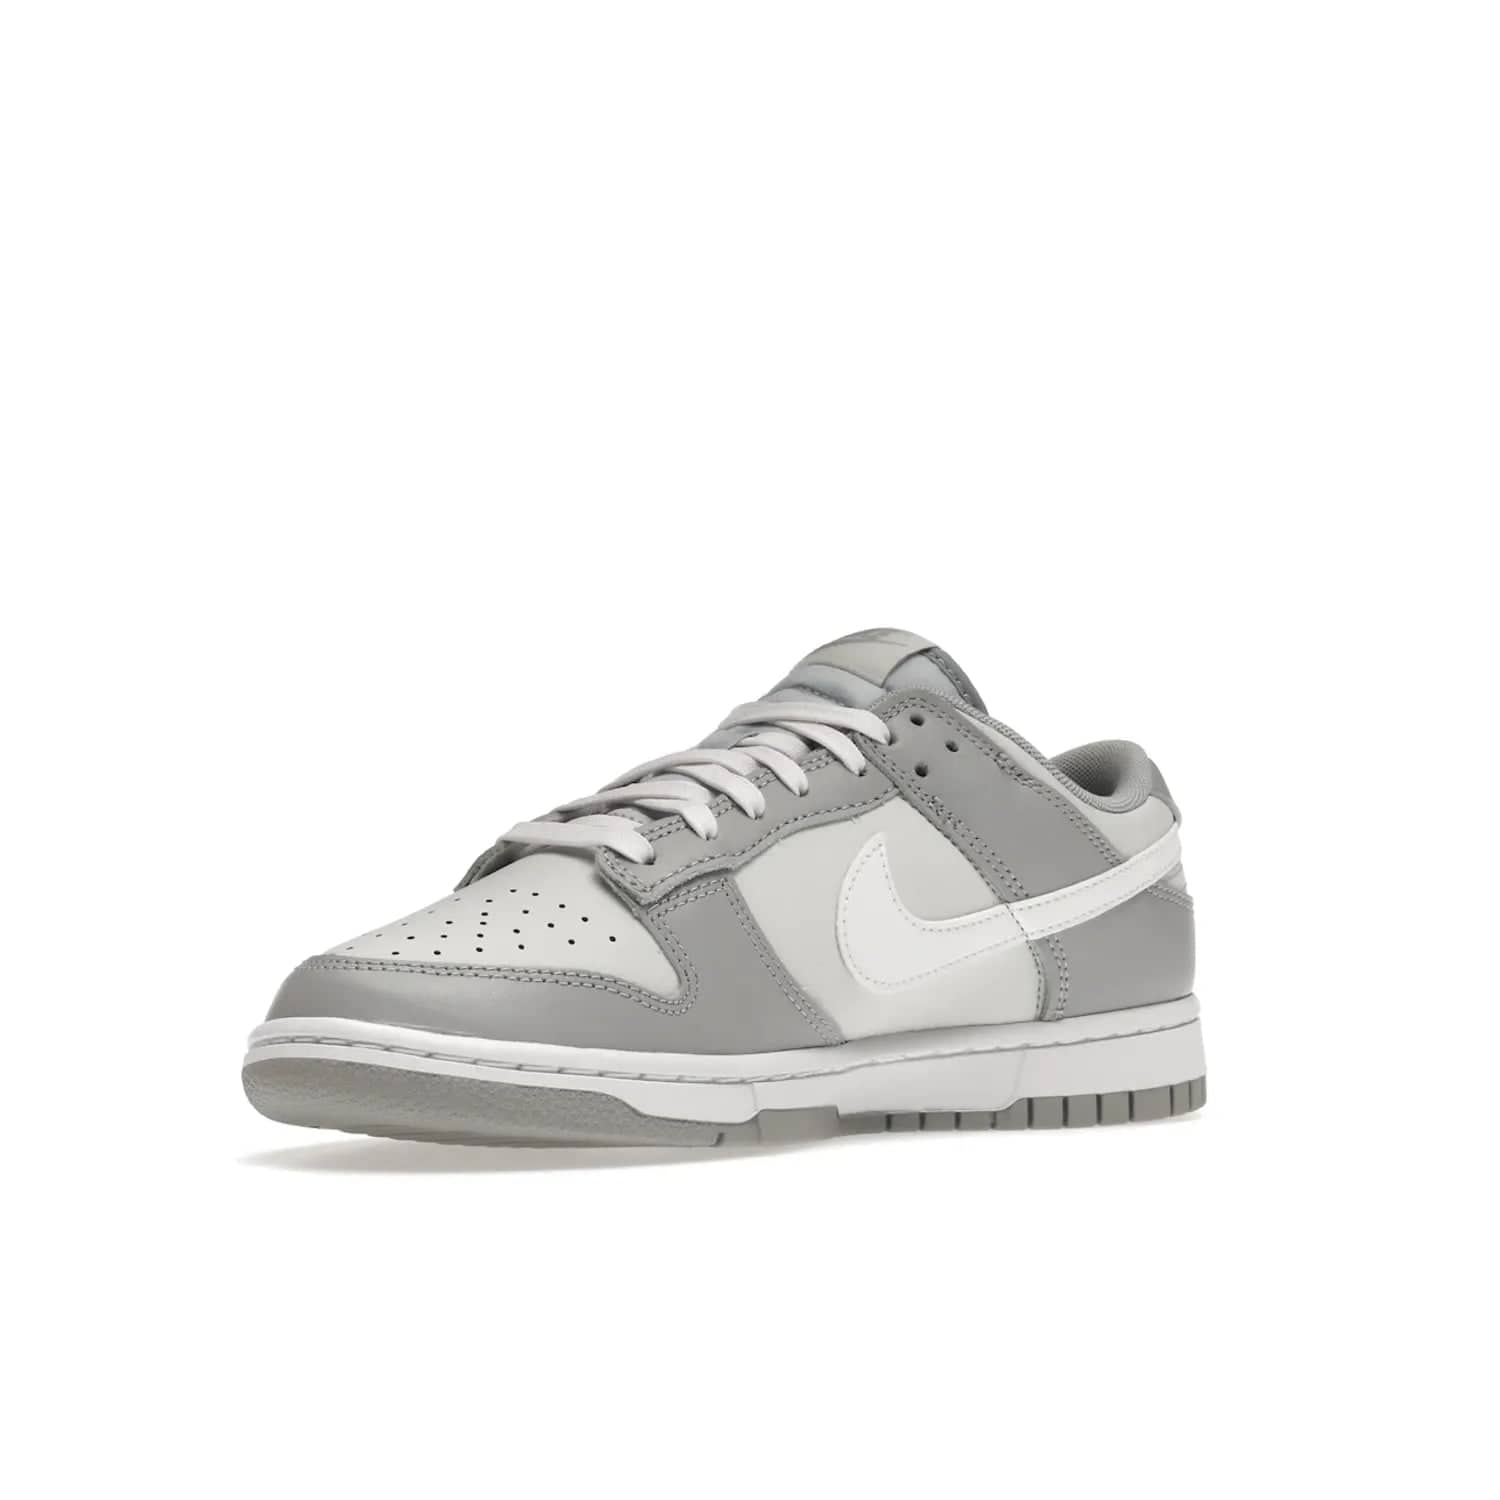 Nike Dunk Low Two Tone Grey - Image 15 - Only at www.BallersClubKickz.com - Fresh Nike Dunk Low Two Tone Grey leather/overlay Sneaker. White Swoosh detailing, nylon tongue, woven label and Air Sole. Get yours and stay on the trend.